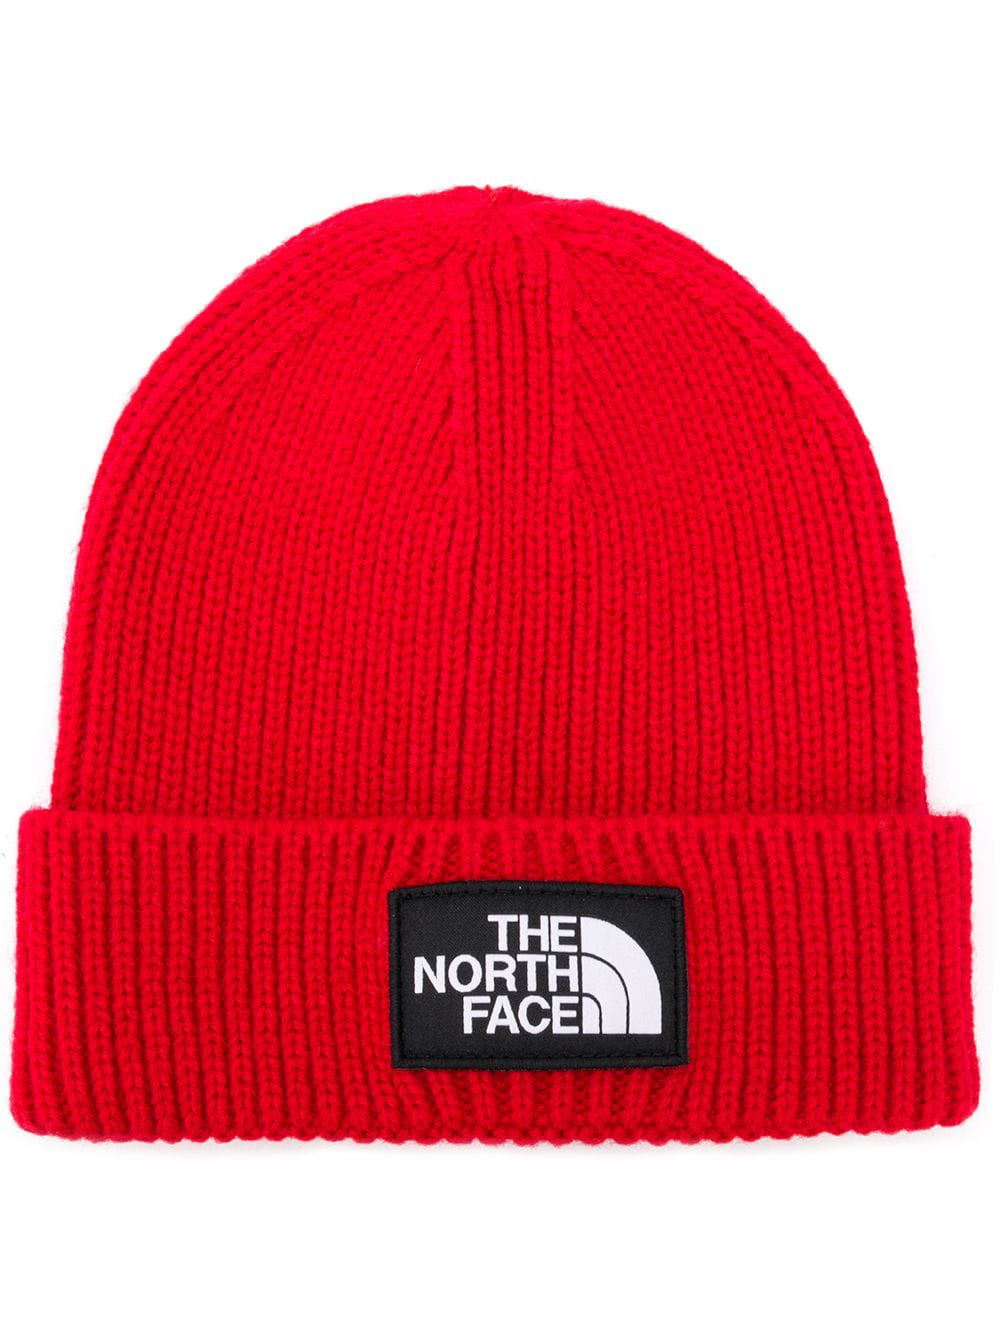 The North Face Logo Patch Beanie In Red Modesens